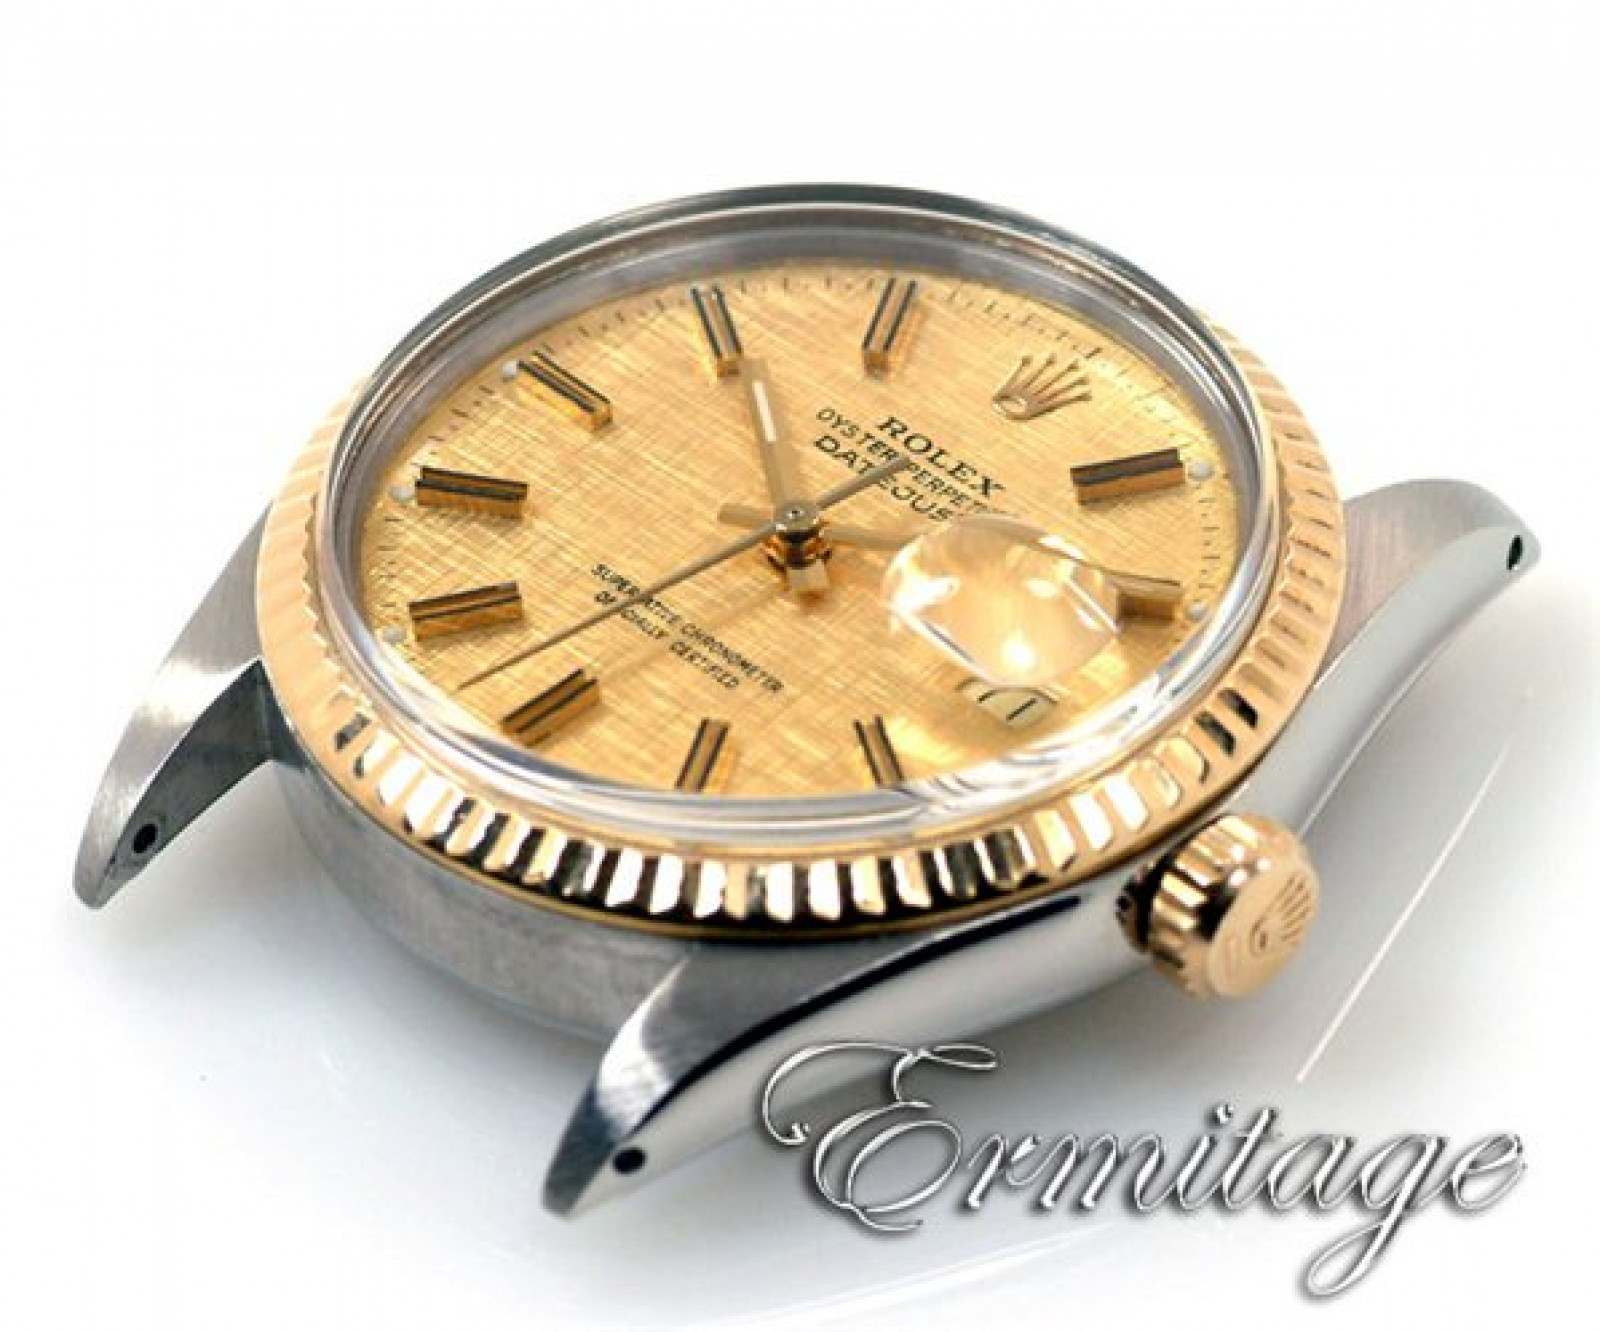 Pre-Owned Rolex Datejust 16013 with Champagne Texture Dial